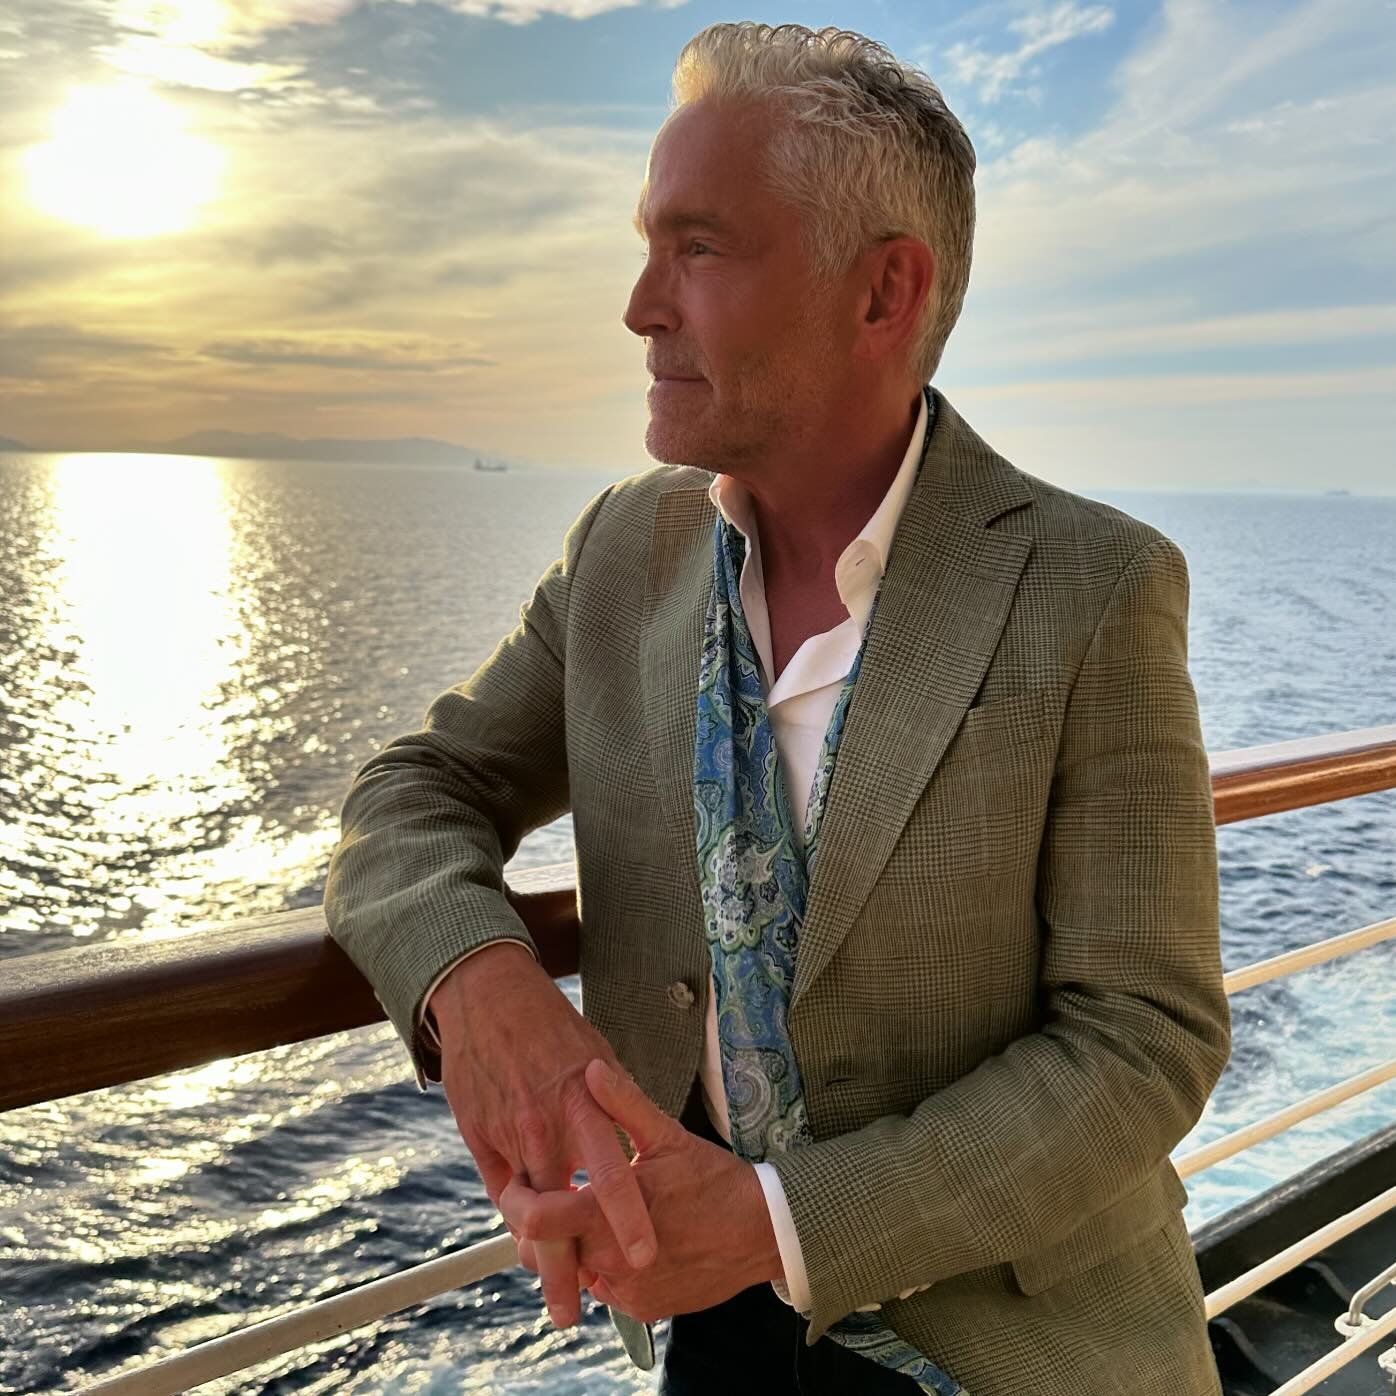 This is the look of a man very content that week one went off without a hitch and week two is beginning so beautifully. Beyond grateful to all our incredible guests who make the #davekozcruise possible with the loving energy you bring! Yall are amazi